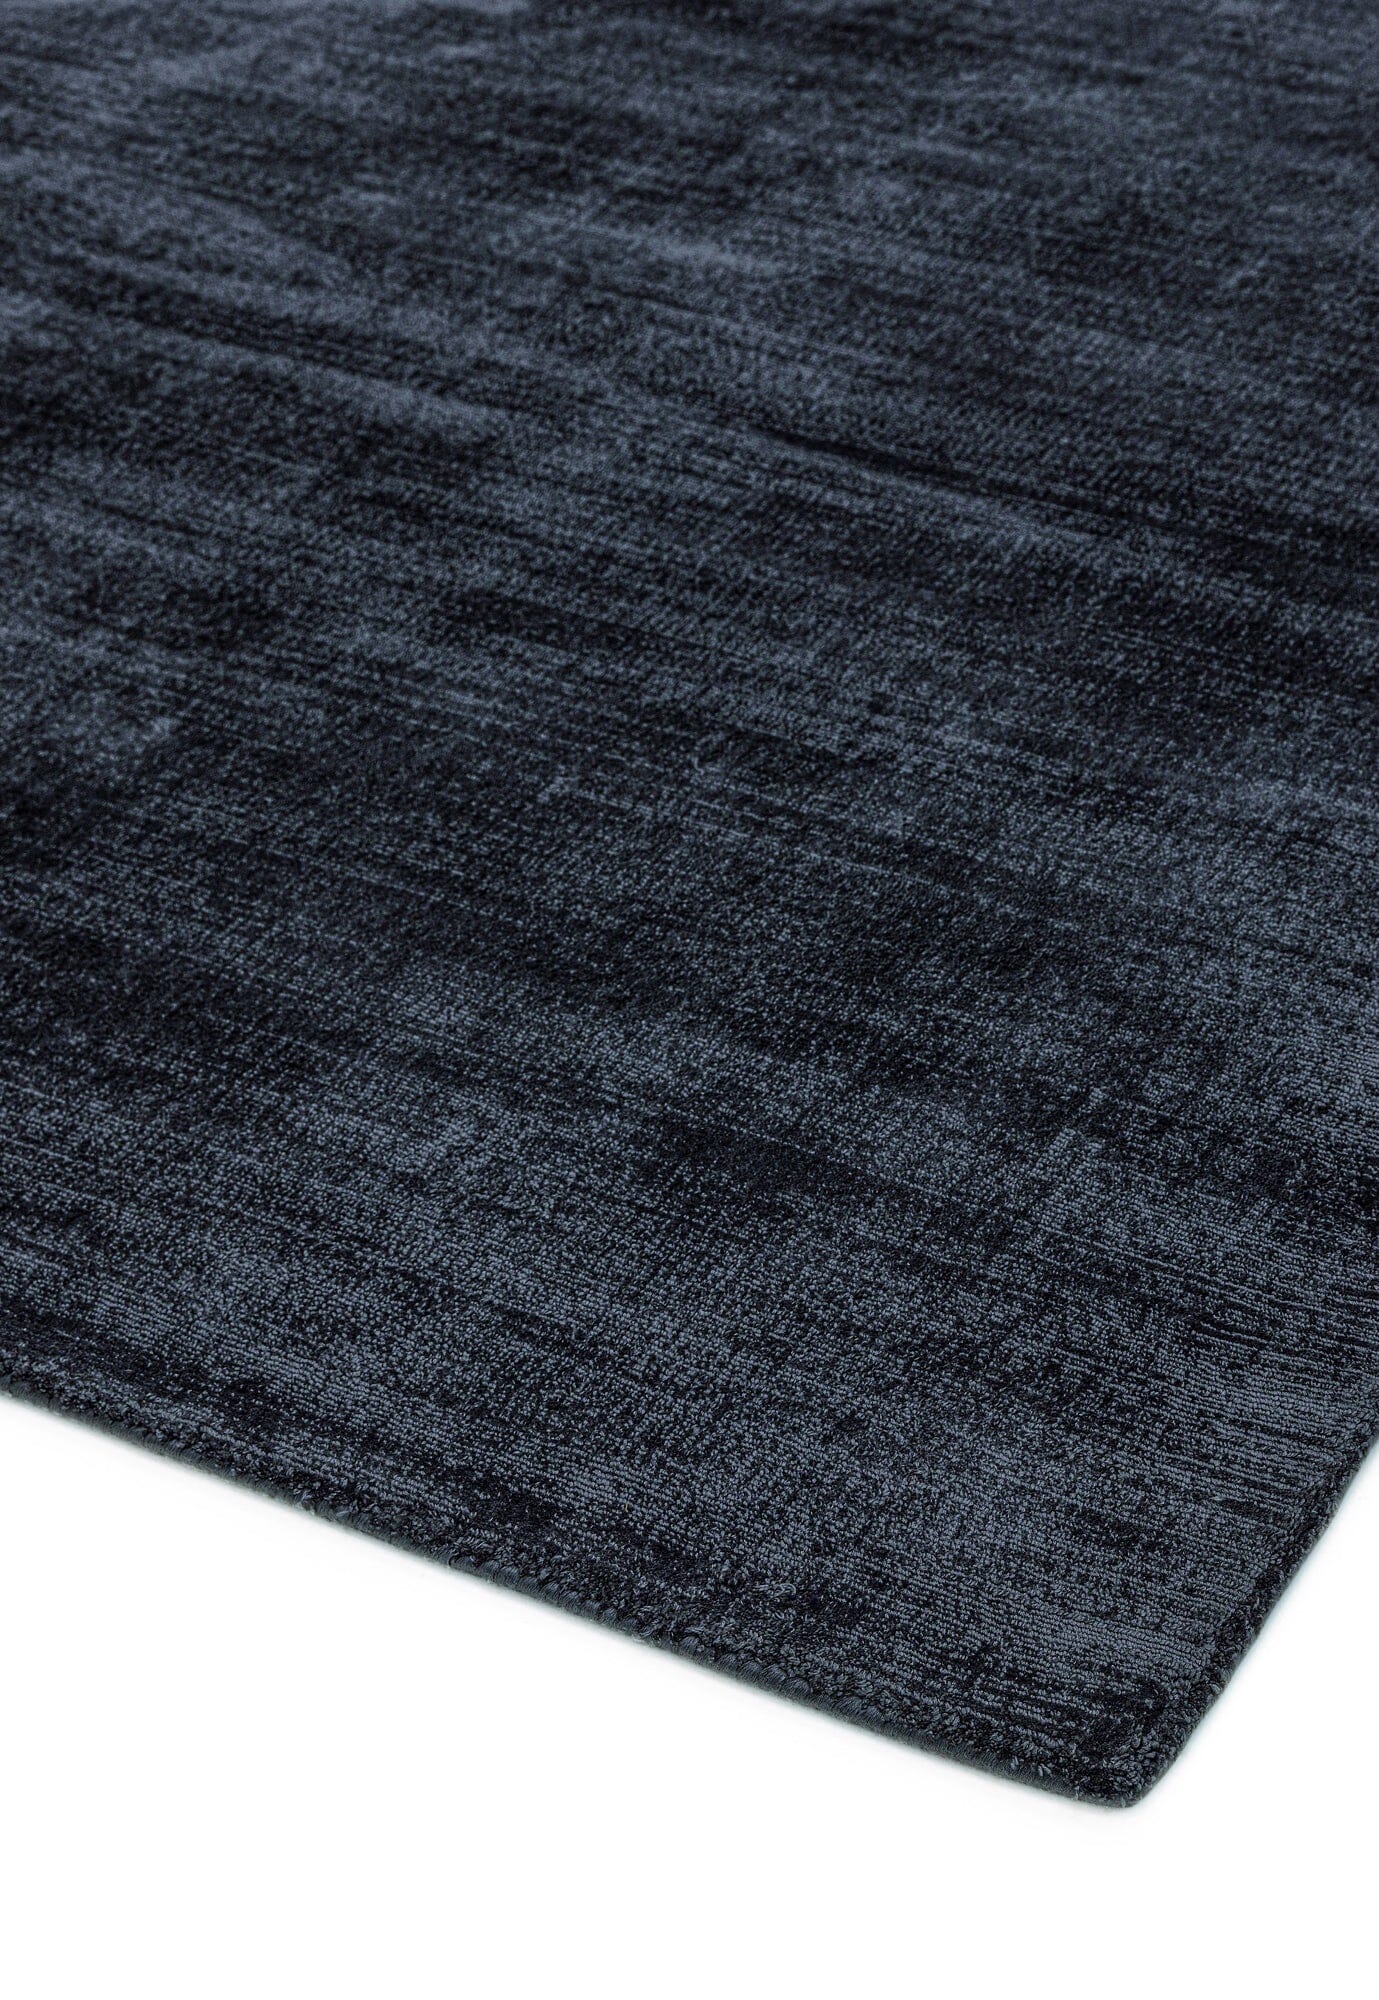  Asiatic Carpets-Asiatic Carpets Blade Hand Woven Rug Navy - 120 x 170cm-Blue 189 